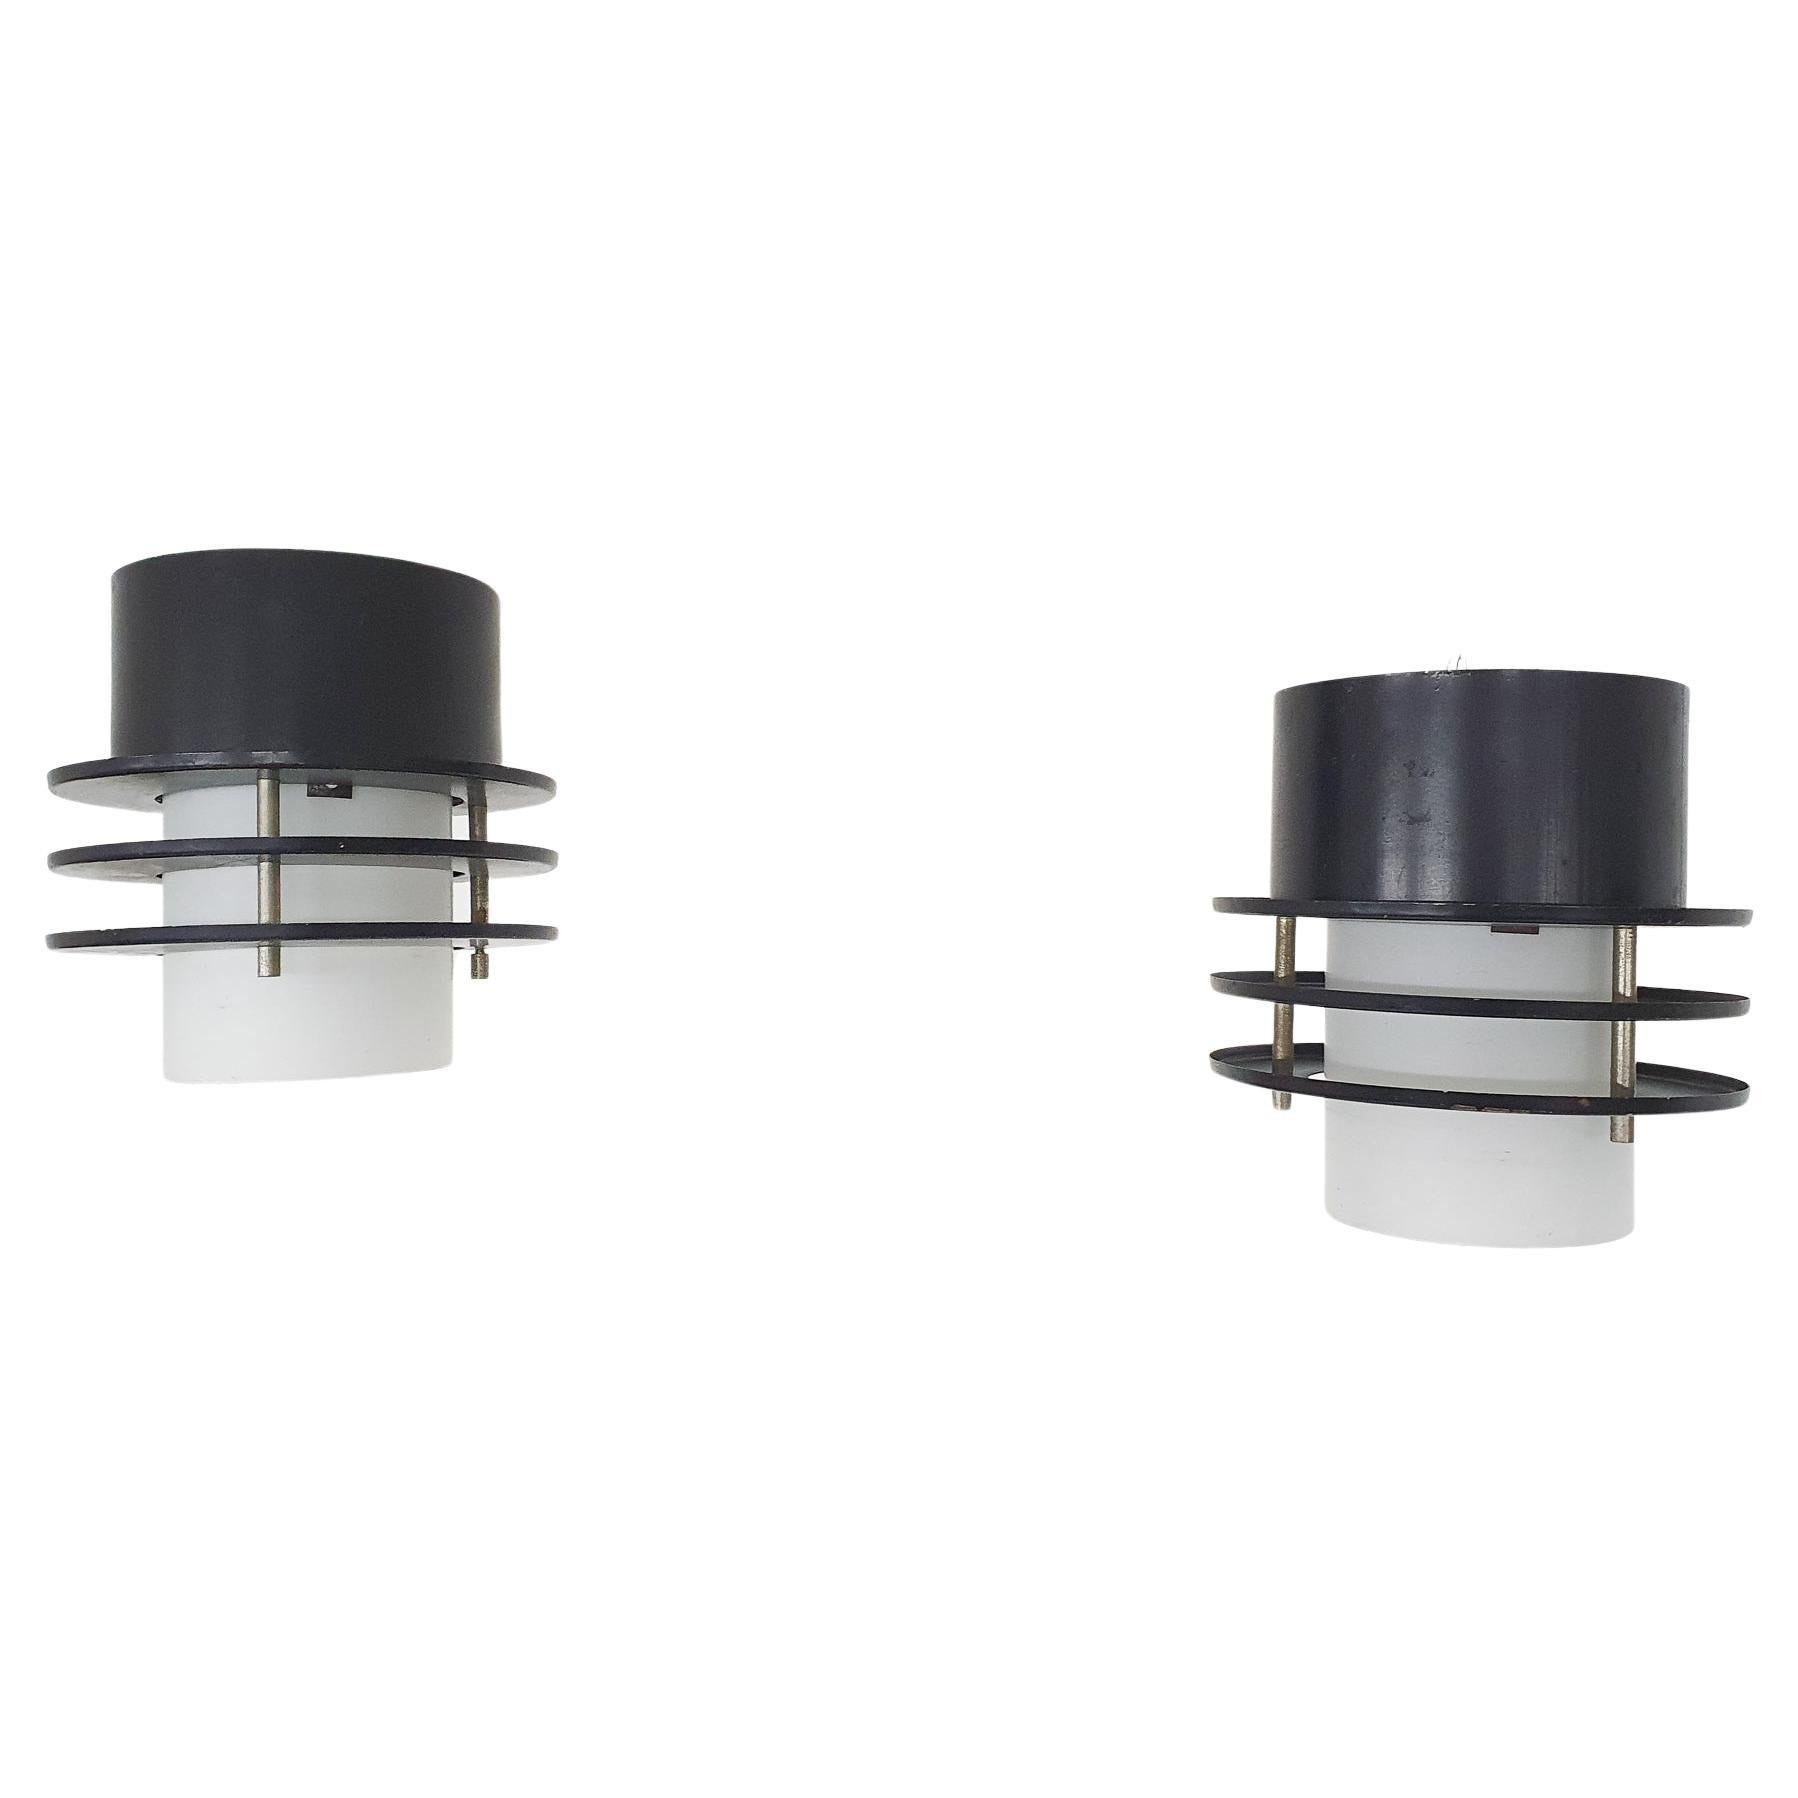 Set of Two Minimalistic Ceiling Lights in Glass and Metal, the Netherlands '60s